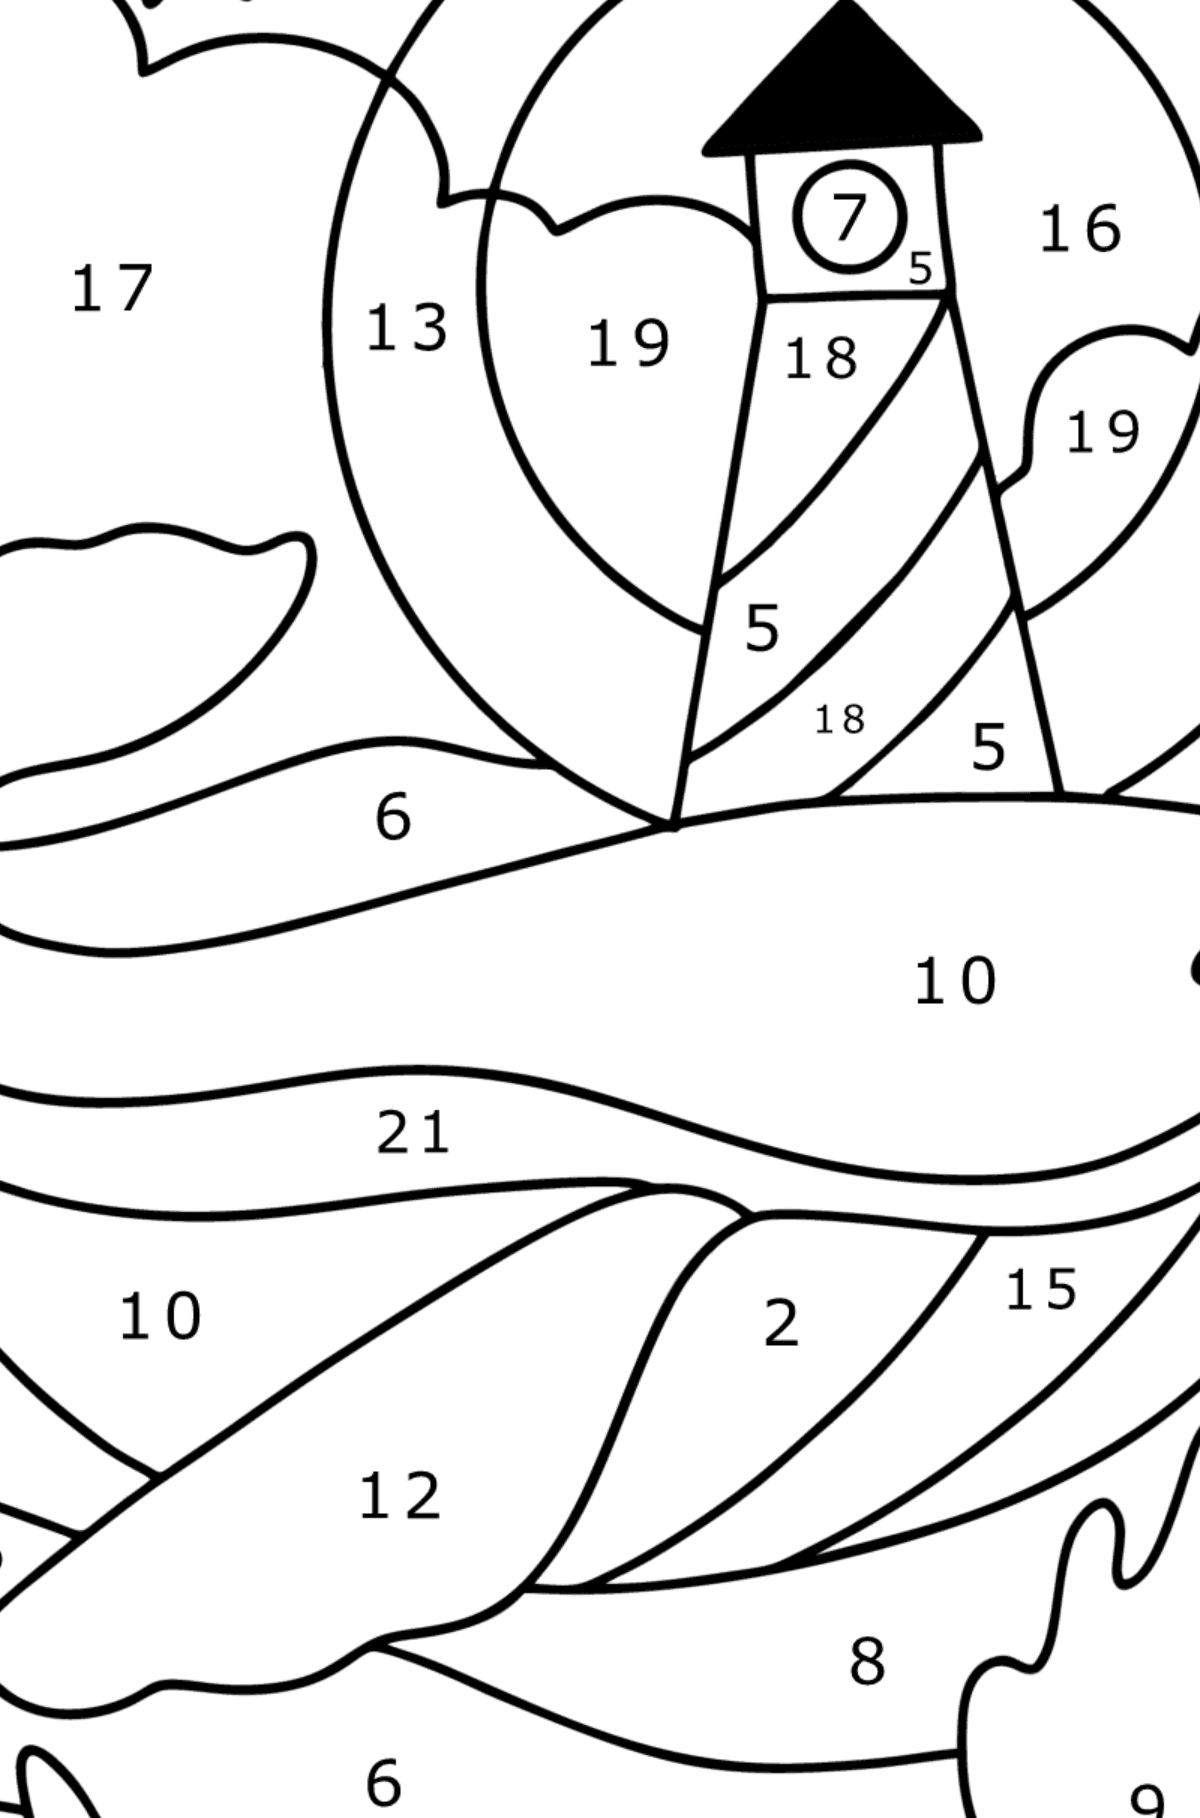 Whale with lighthouse coloring page - Coloring by Numbers for Kids